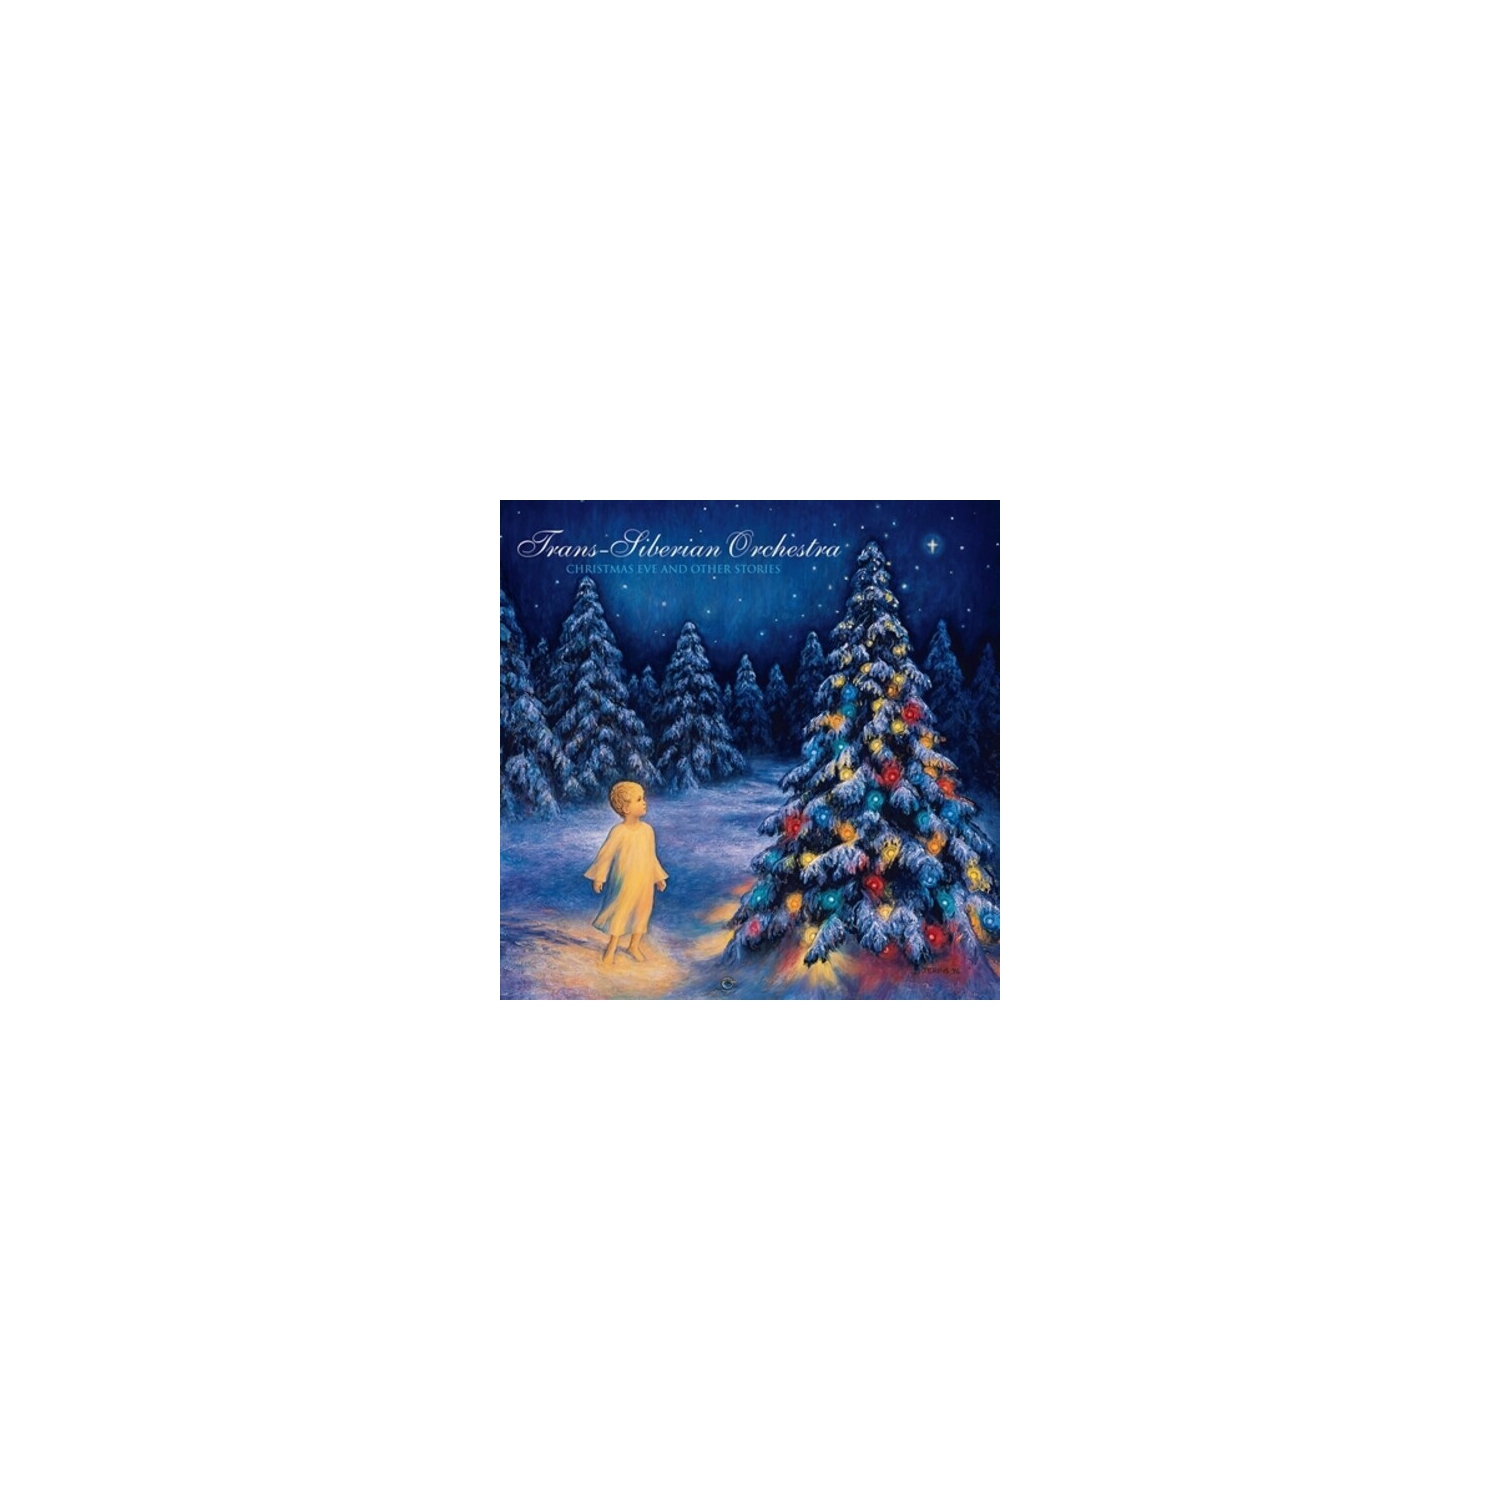 Trans-Siberian Orchestra - Christmas Eve and Other Stories [VINYL LP]